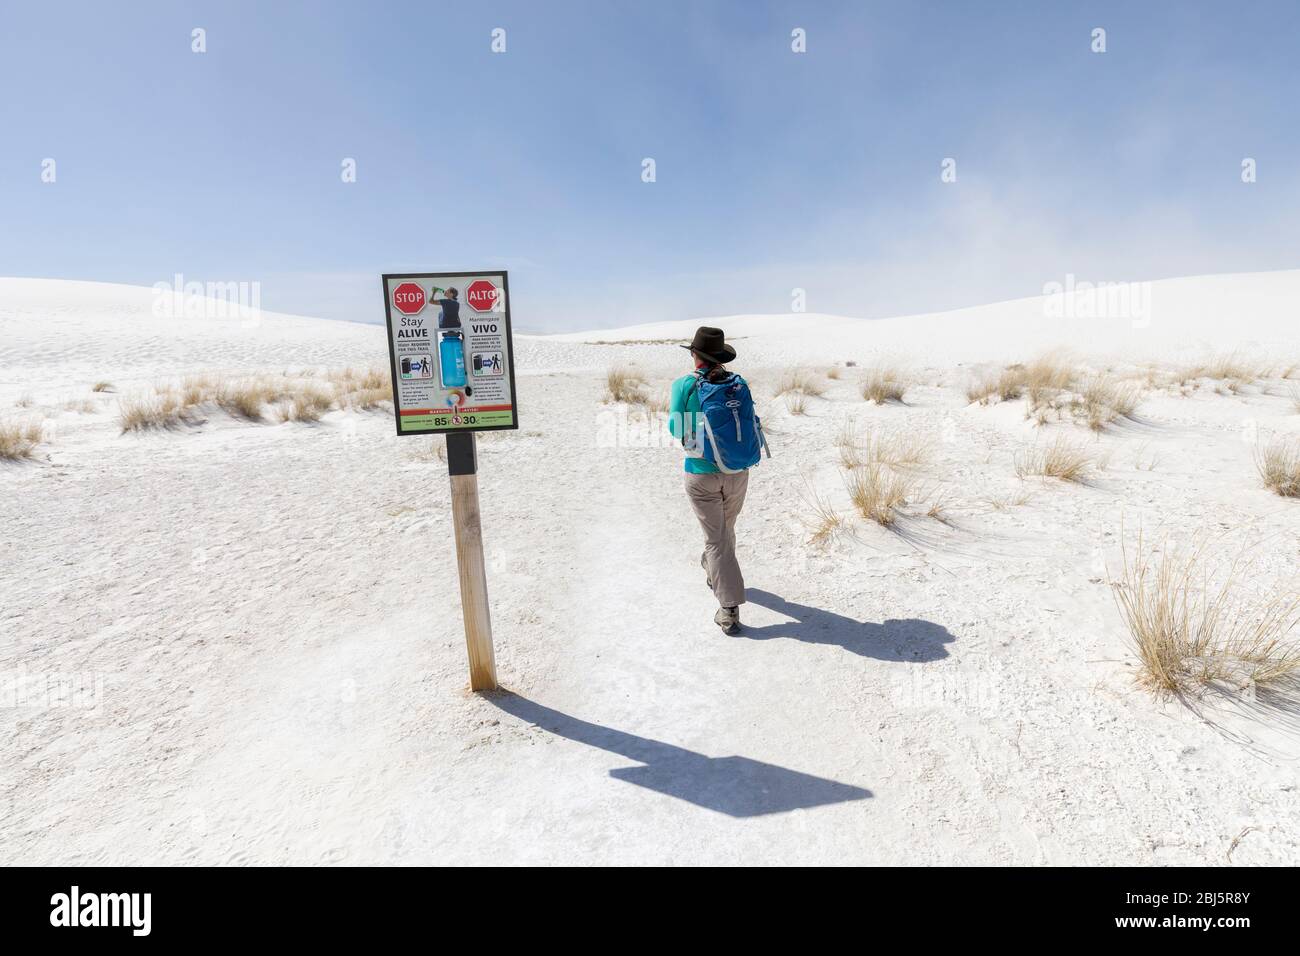 Stay alive drink water warning sign, White Sands, New Mexico, USA Stock Photo